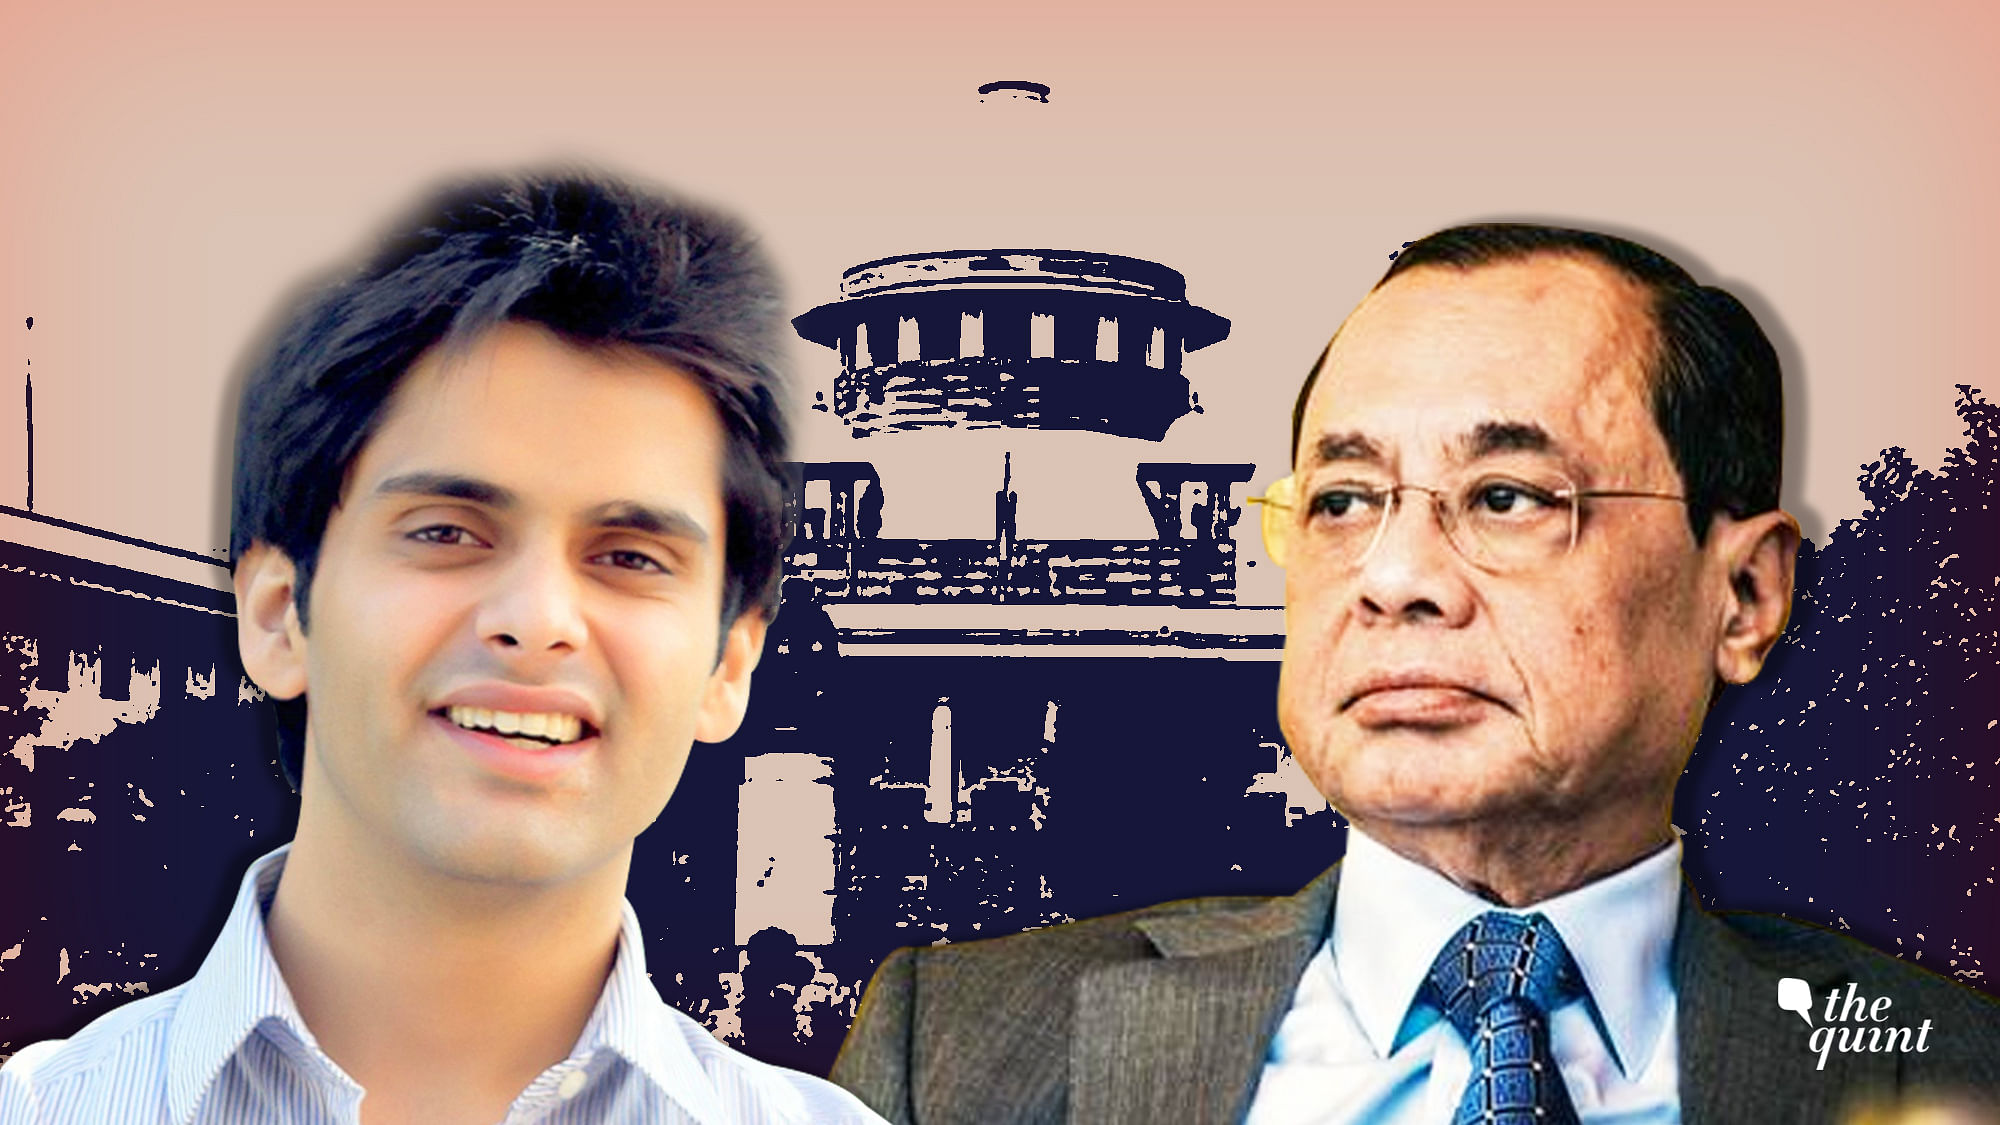 On Thursday 25 April, SC ordered that Utsav Bains’ allegations will be vetted by the former SC Justice AK Patnaik.